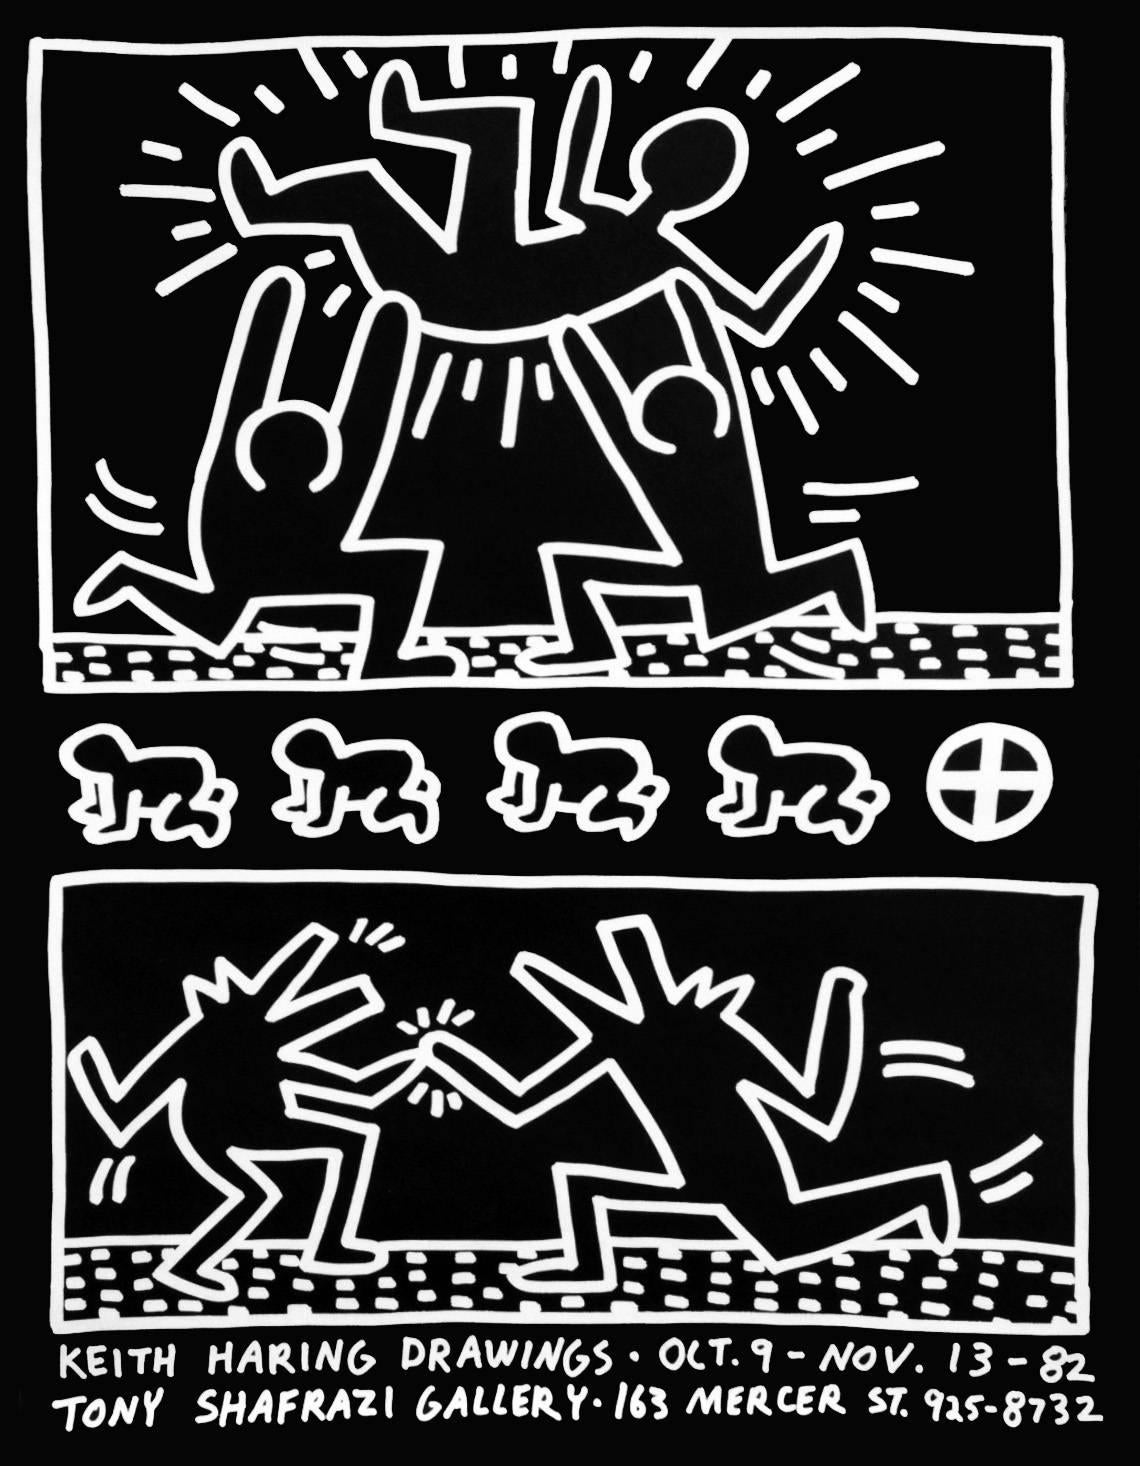 Keith Haring Tony Shafrazi Gallery 1982:
The much historic early Keith Haring exhibition poster, illustrated by Haring on the occasion of: 'Keith Haring Drawings' Oct. 9 - Nov. 13 - 1982: Tony Shafrazi Gallery, New York. 

The classic white on